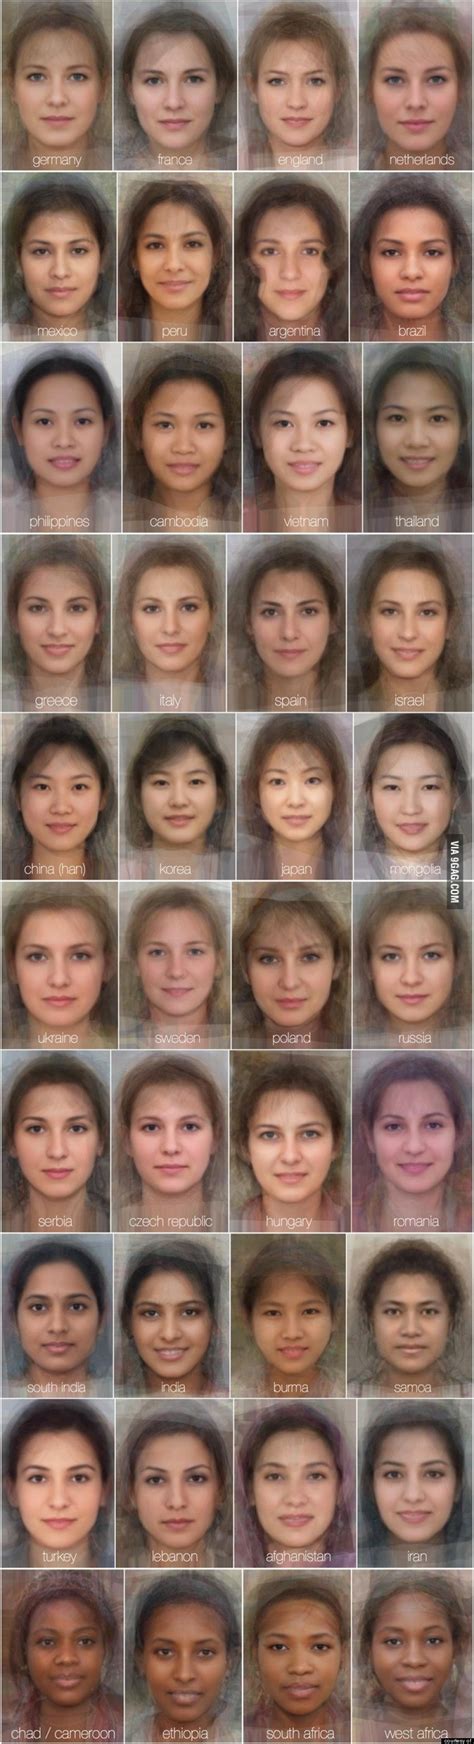 The Average Womans Face Around The World Photo